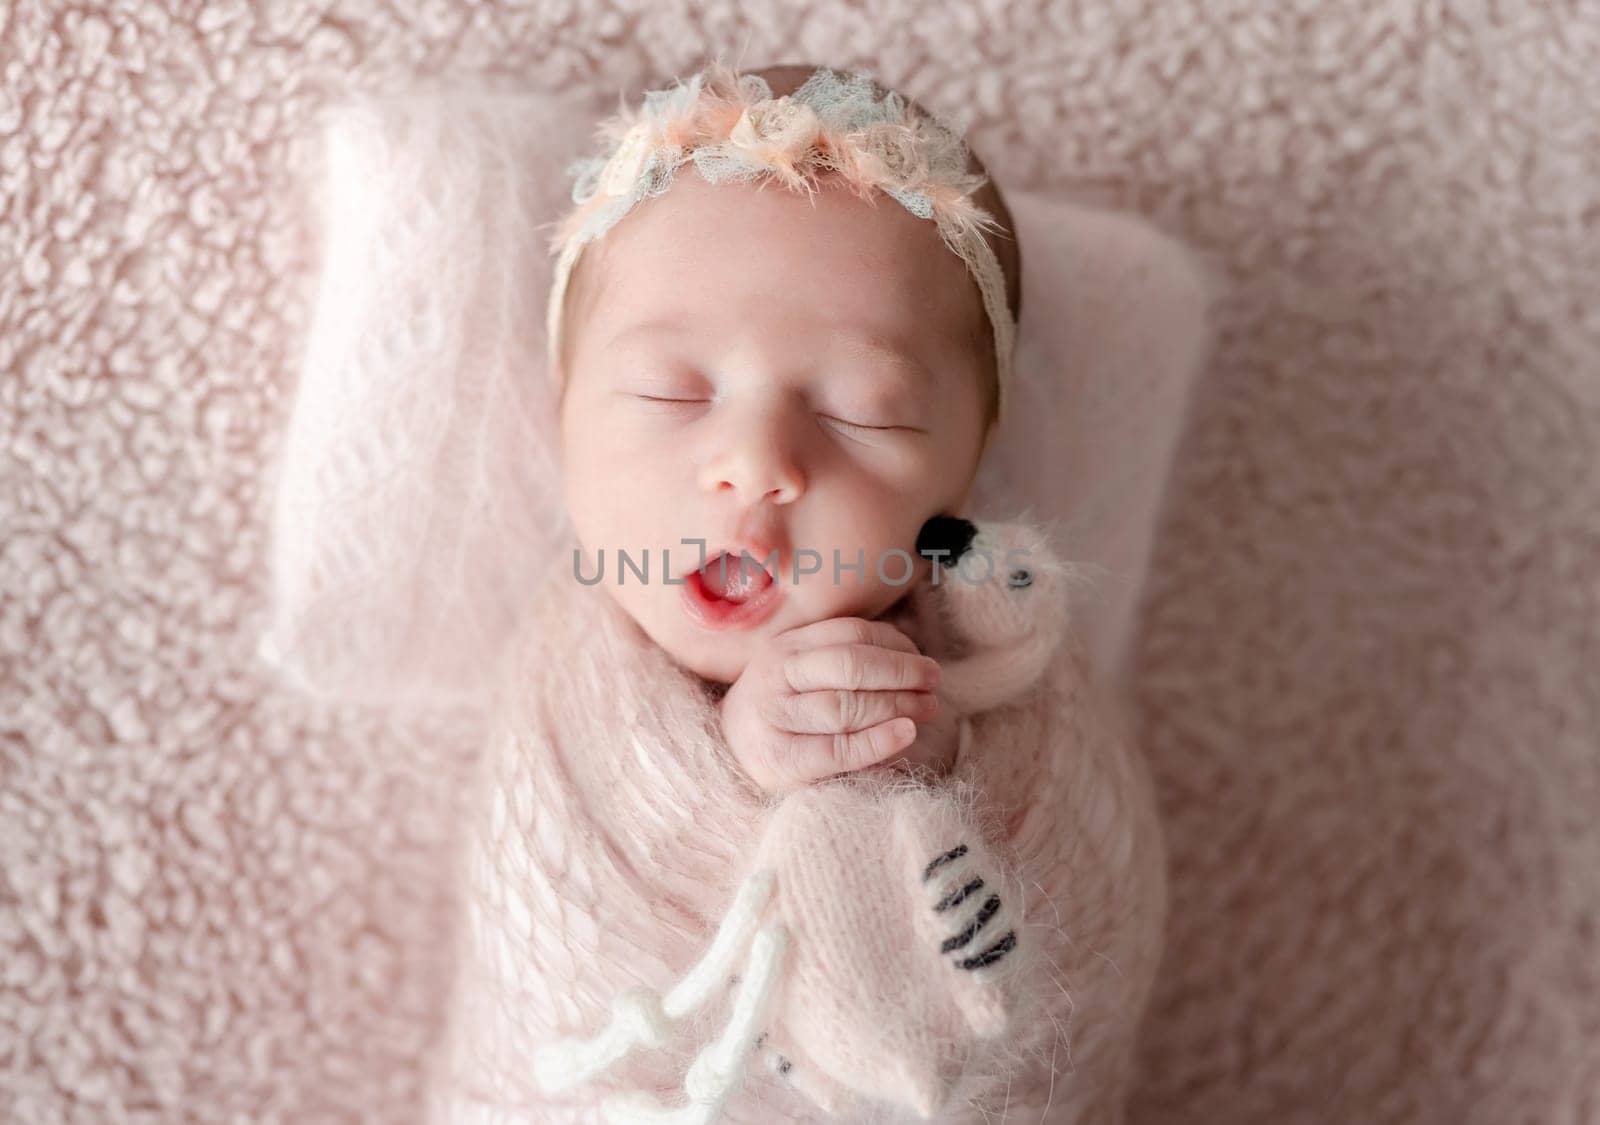 Newborn Girl Wrapped In A Blanket With A Flamingo Toy In Her Hands Yawns During A Professional Newborn Photoshoot